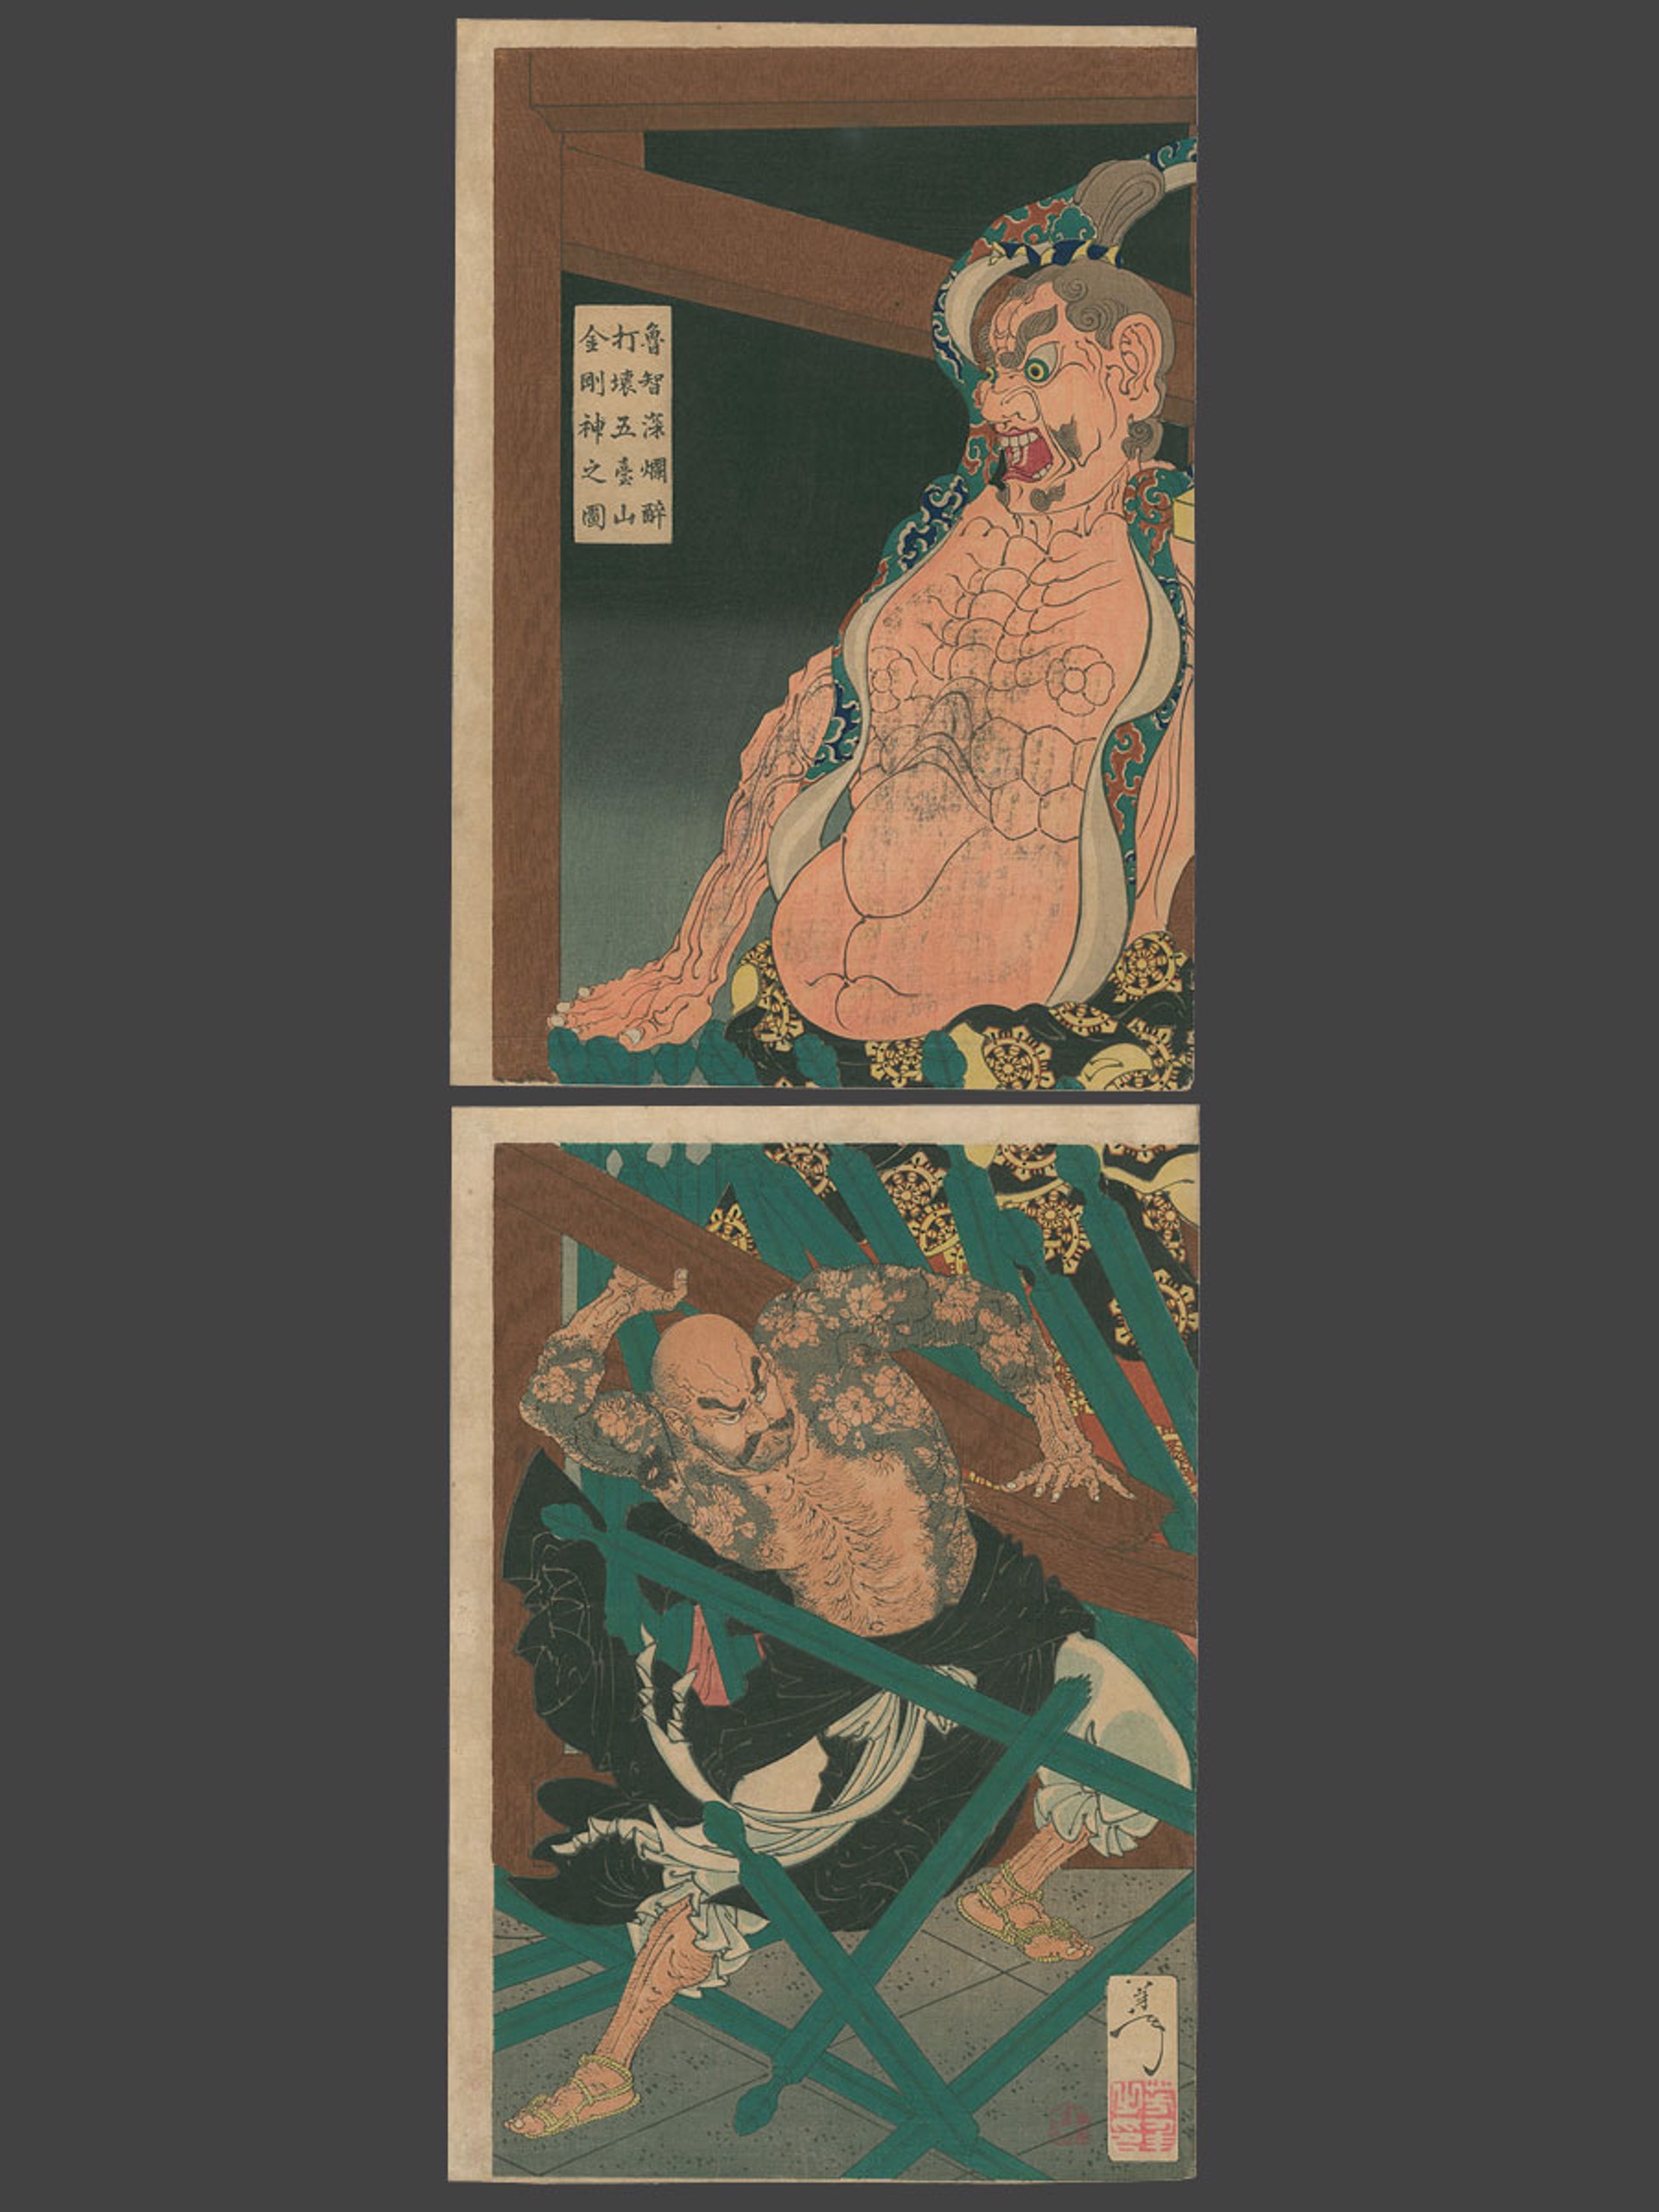 Lu Chi Shen, in a Drunken Rage, Smashing the Guardian Figure at the Temple on the Five Crested Mountain by Yoshitoshi